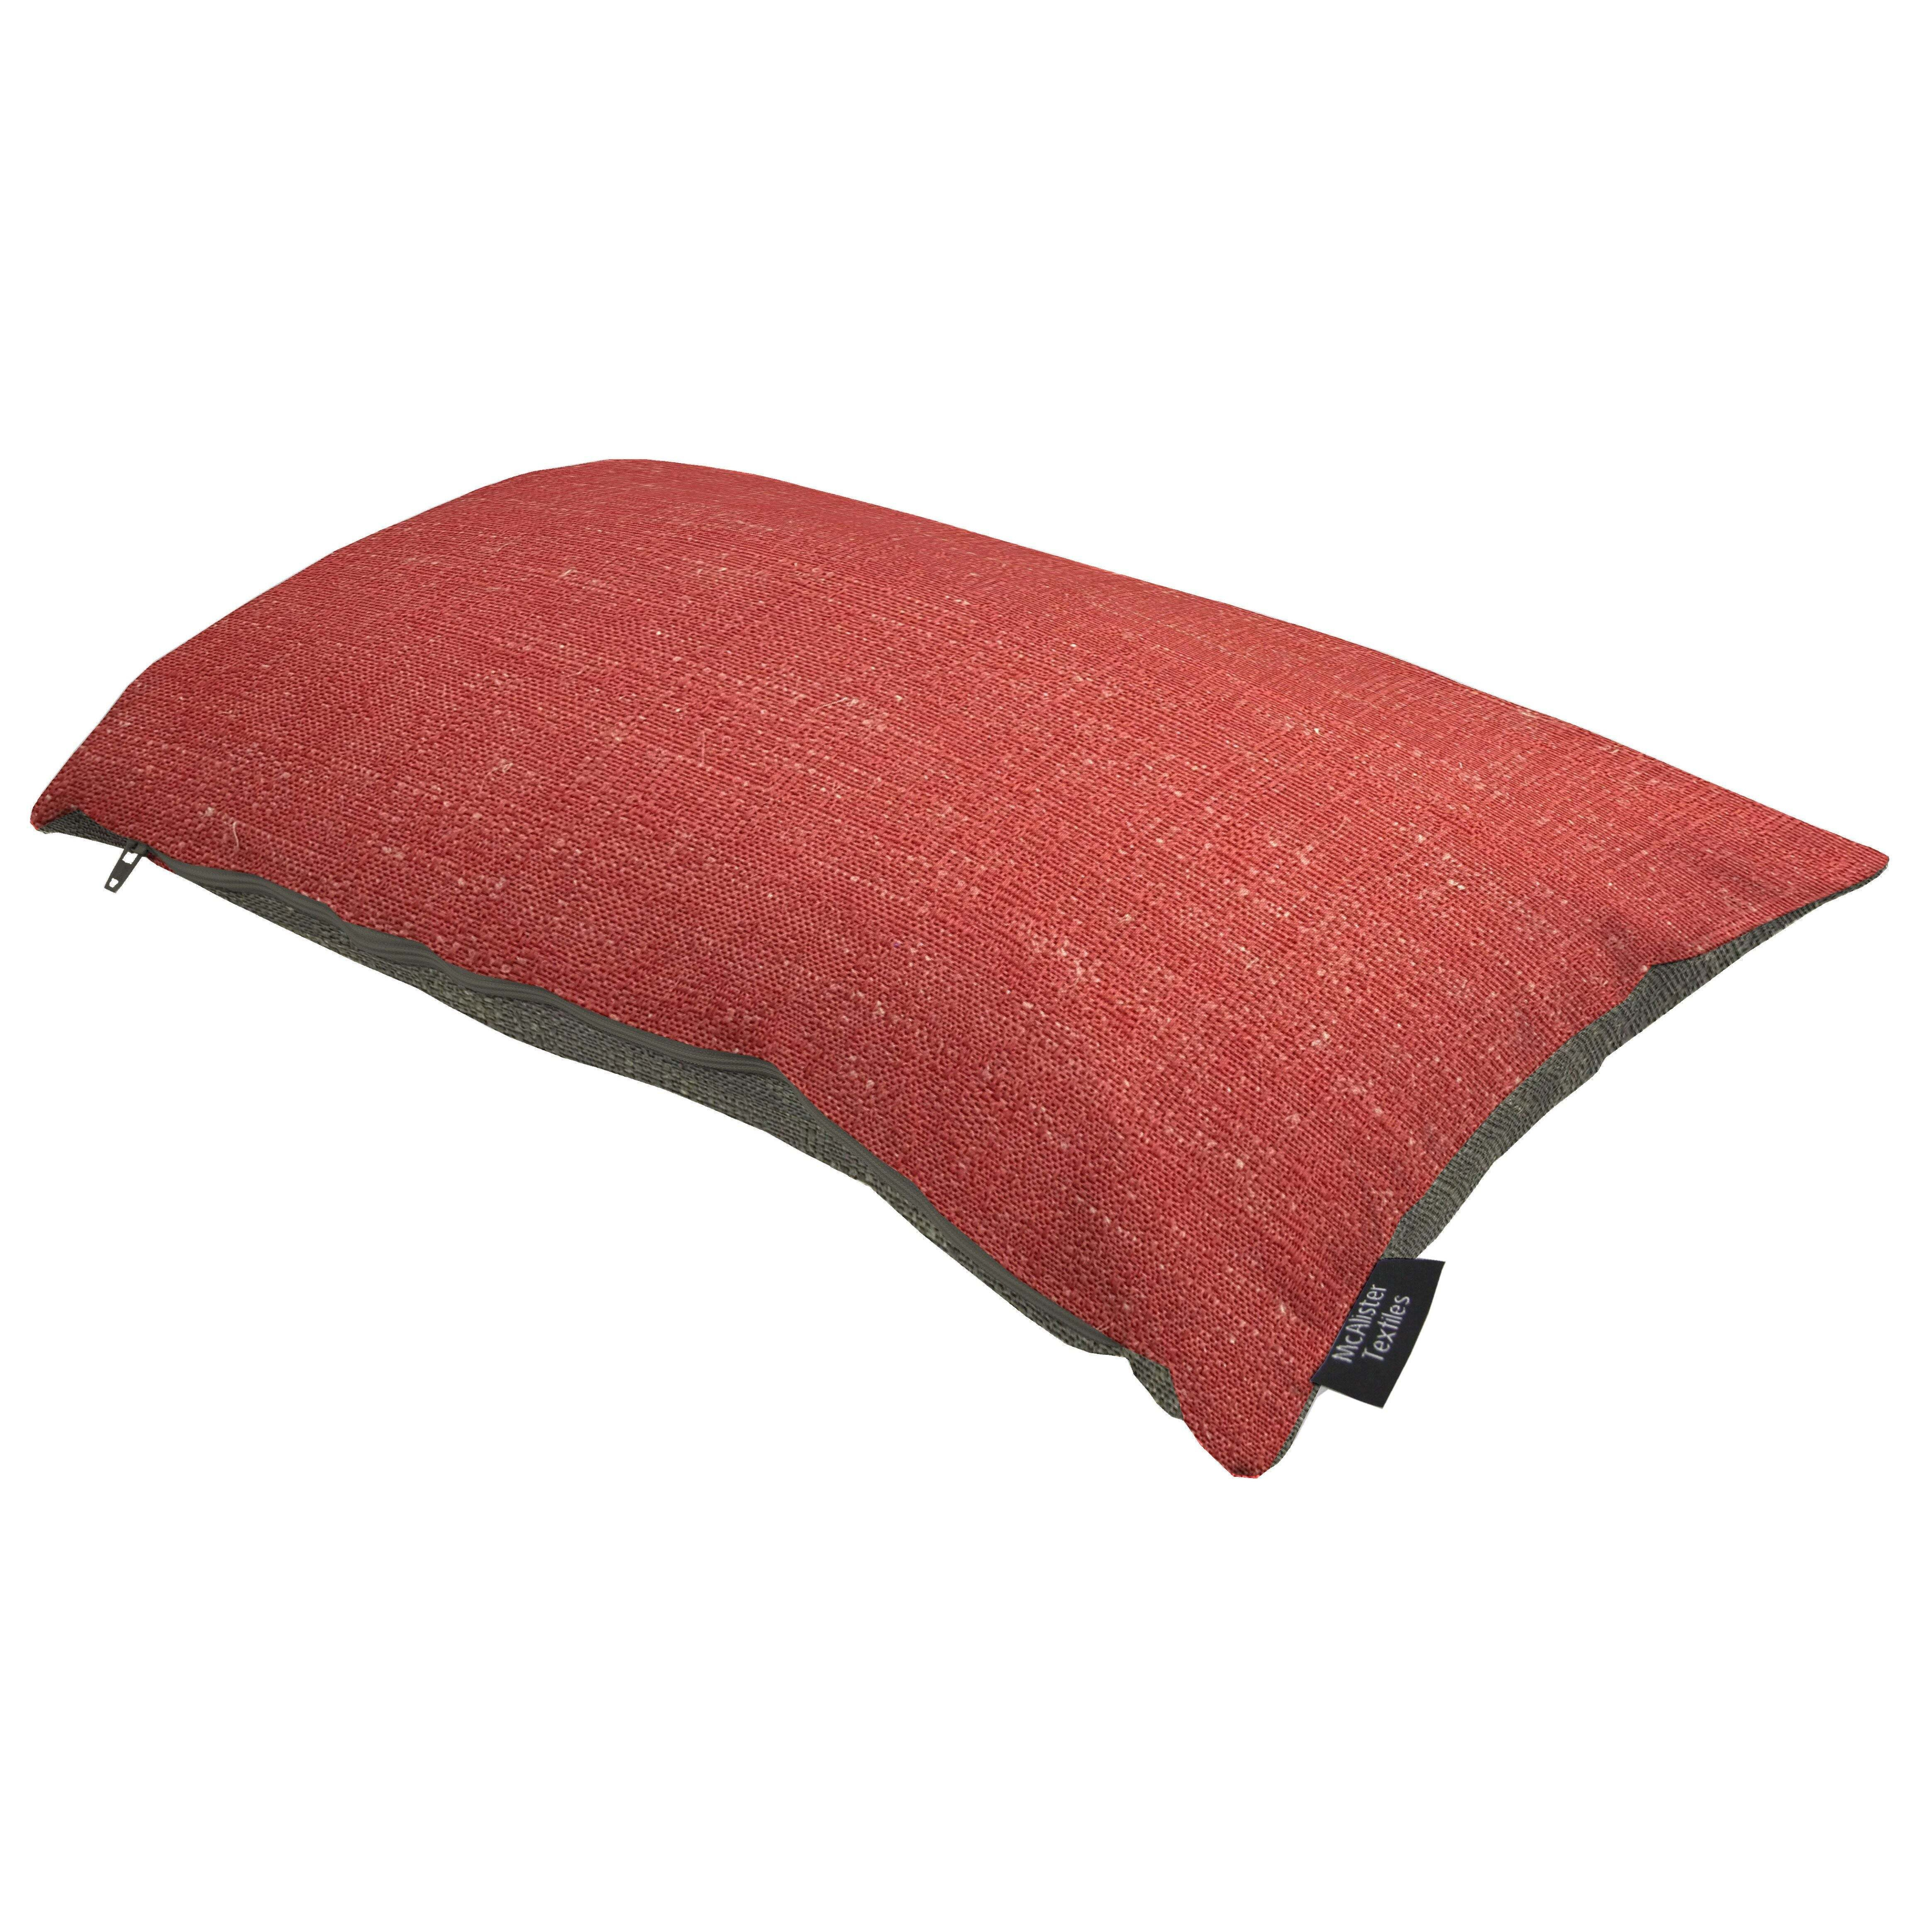 Harmony Red and Grey Plain Cushions, Polyester Filler / 50cm x 30cm